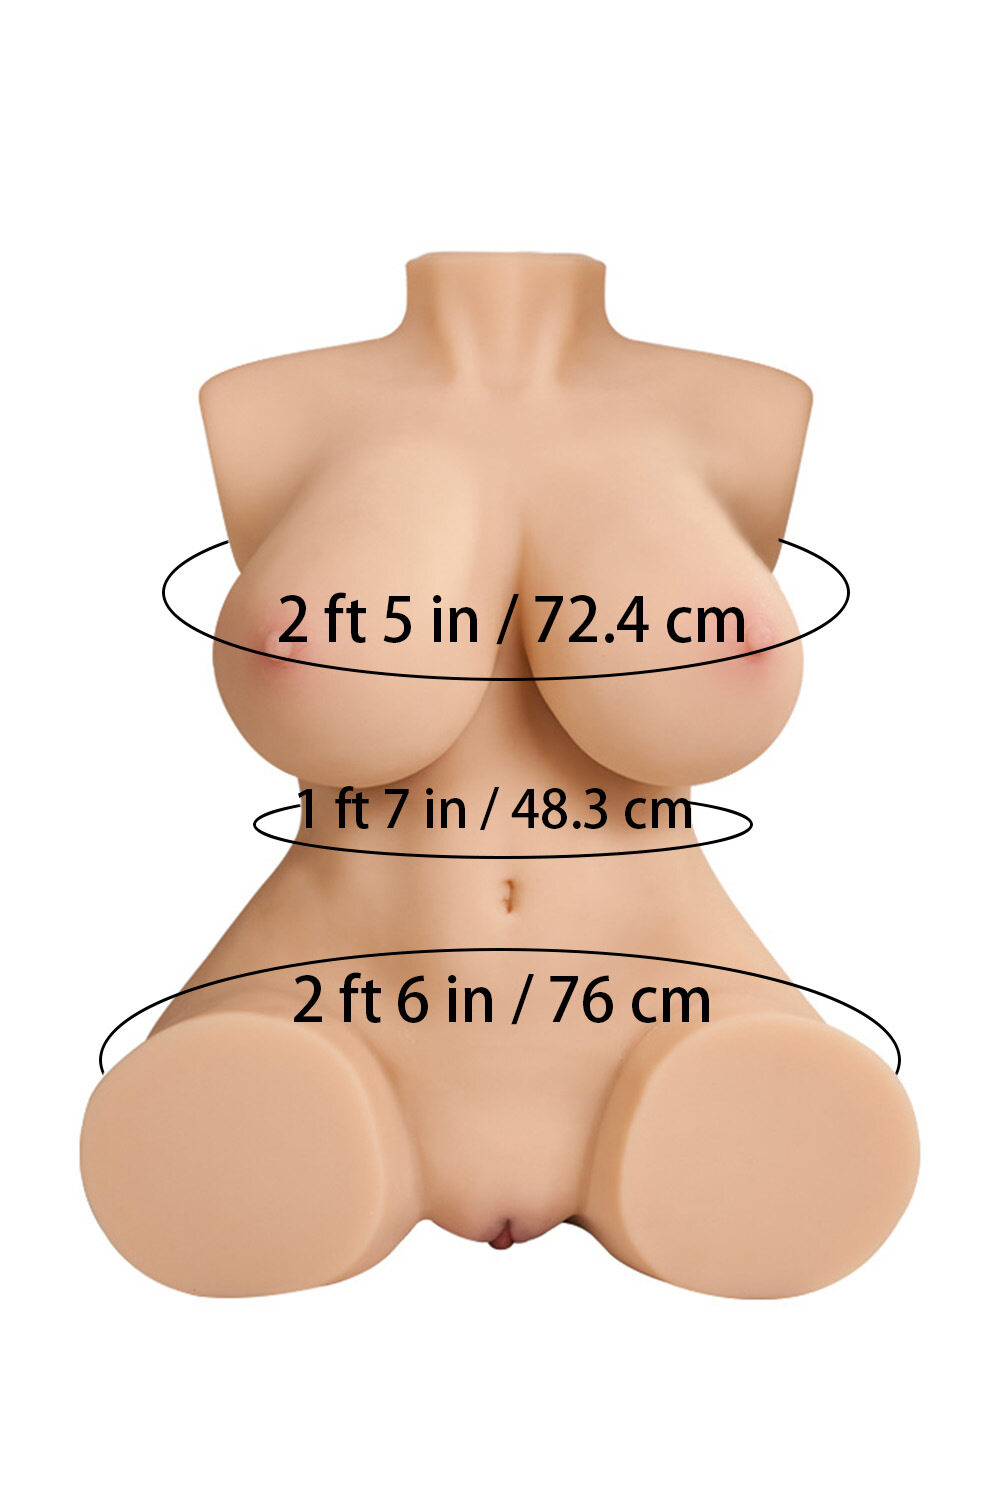 Mara Pretty 48.5cm(1ft7) G-Cup Tantaly Sex Real Doll (In Stock) image2